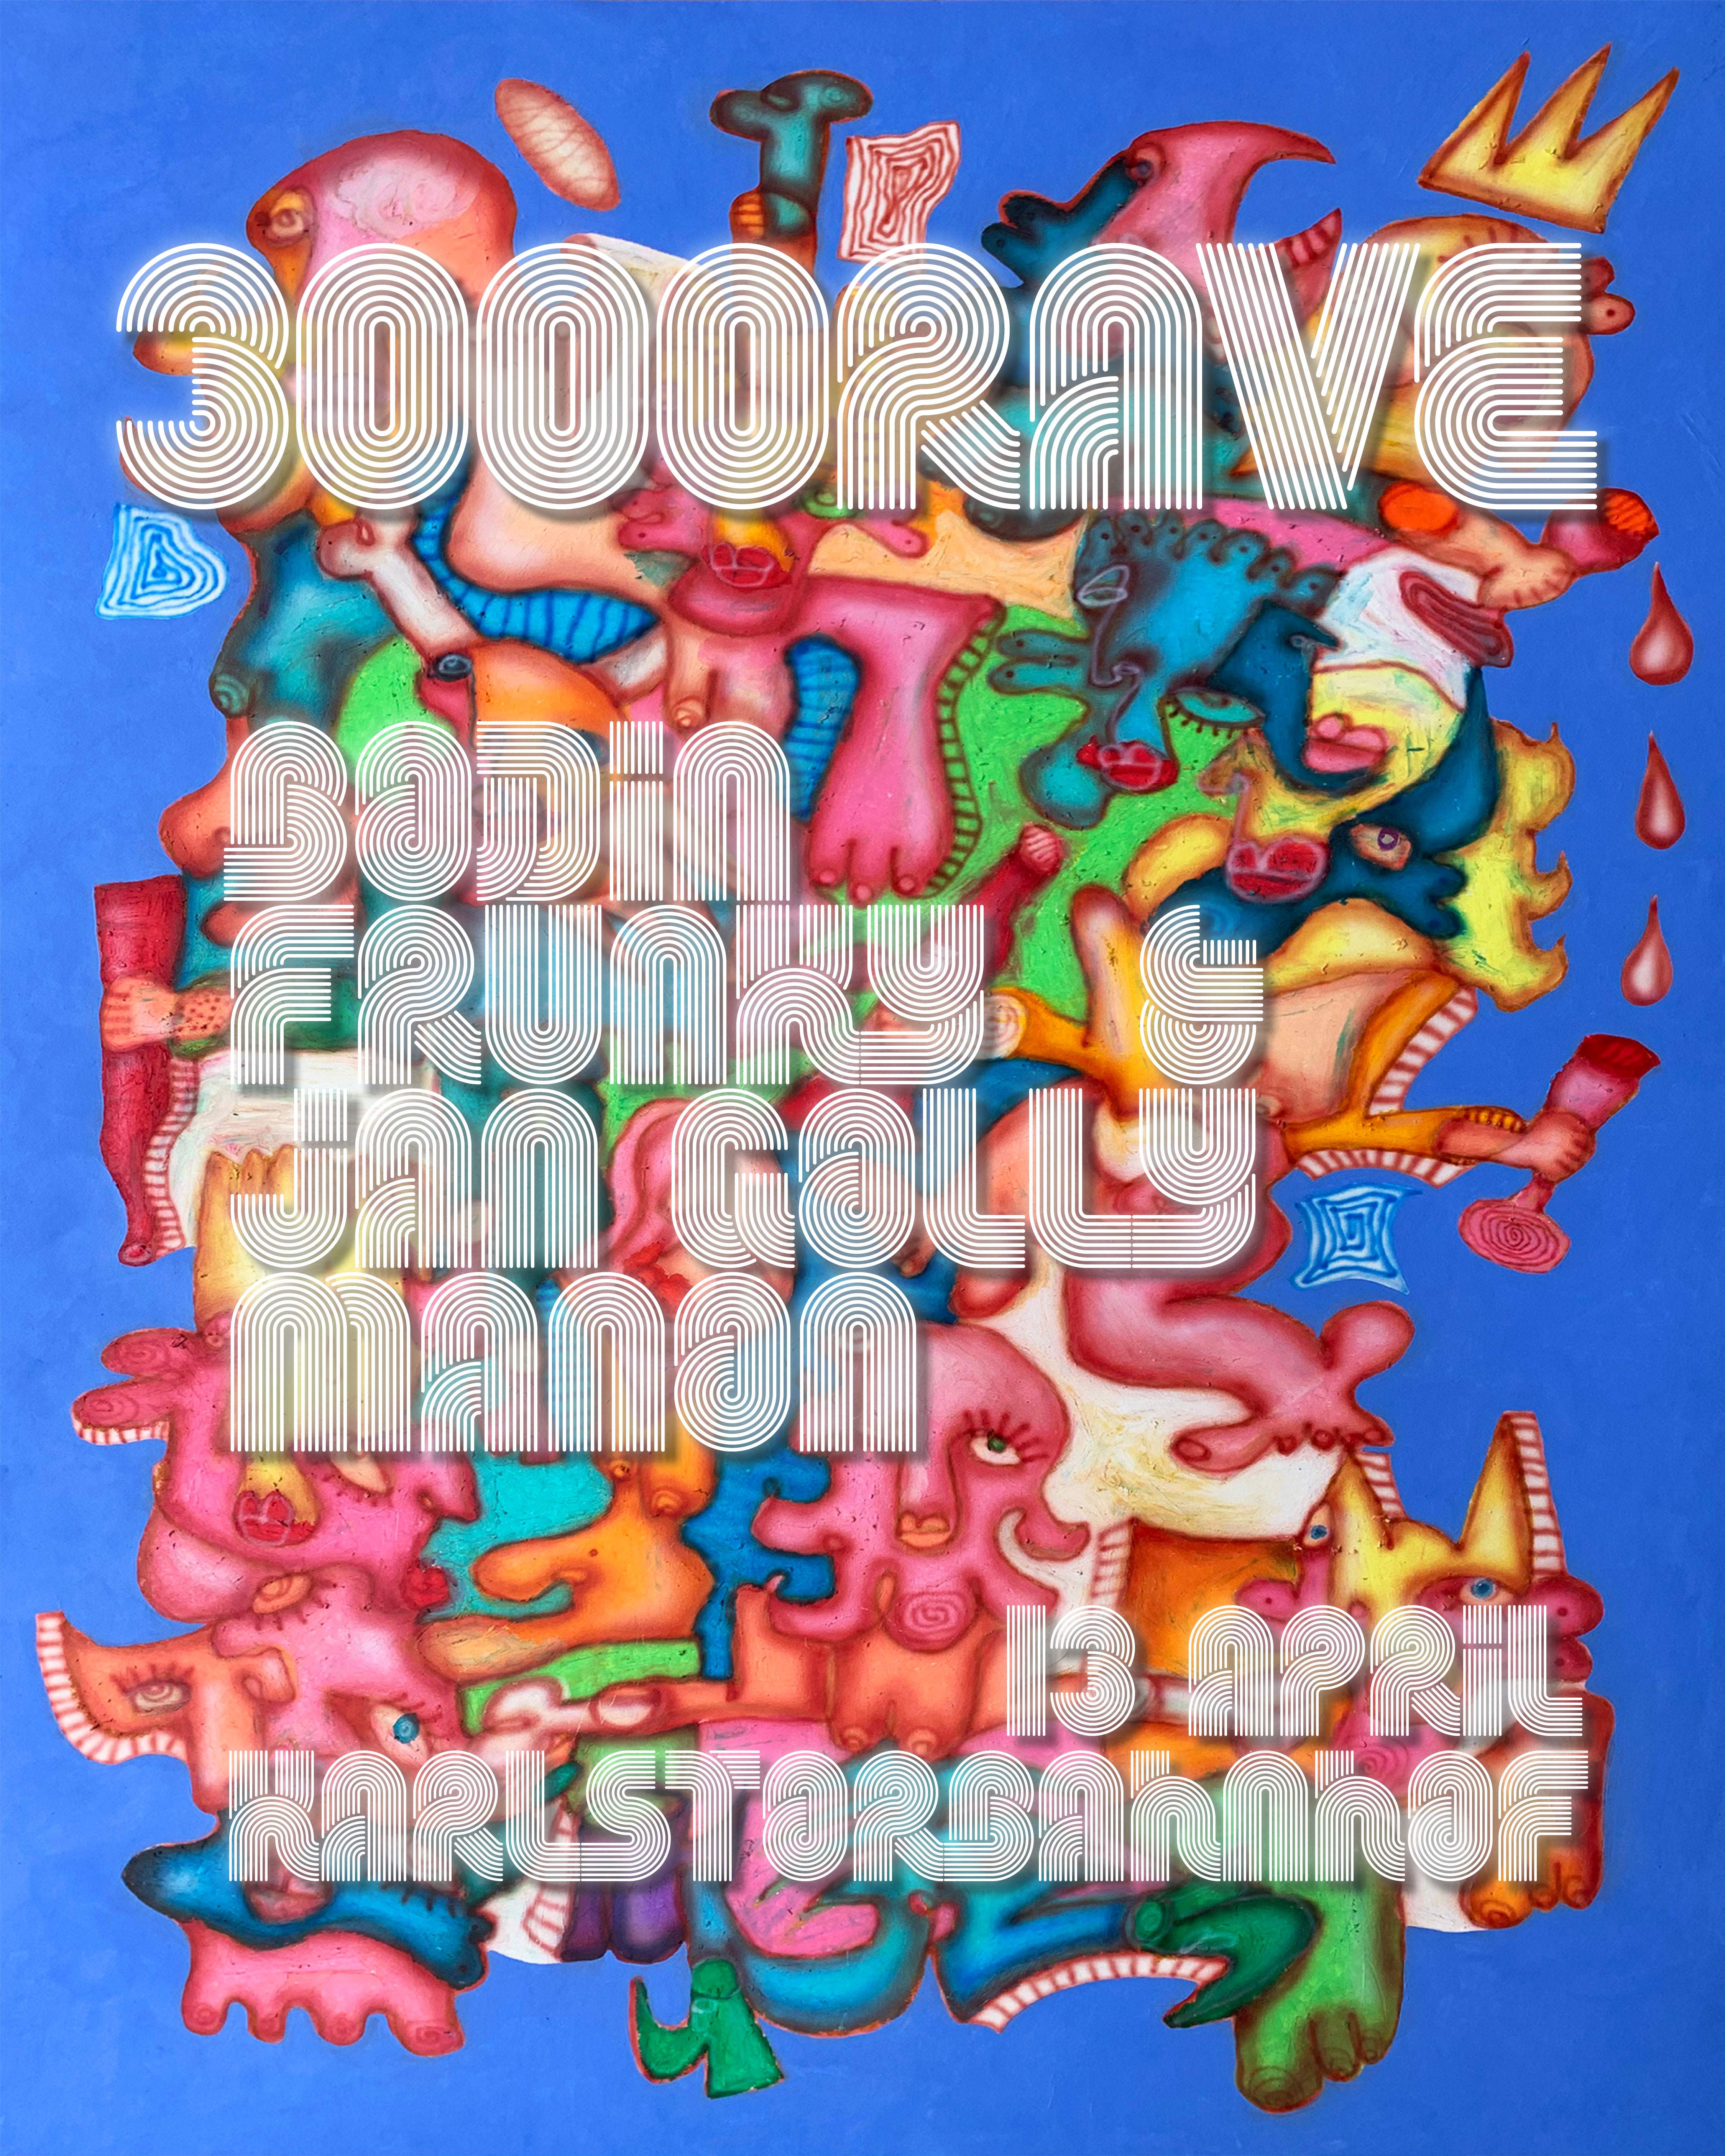 3000Rave with Bodin, Frunky & Jan Golly and Manon - Página frontal